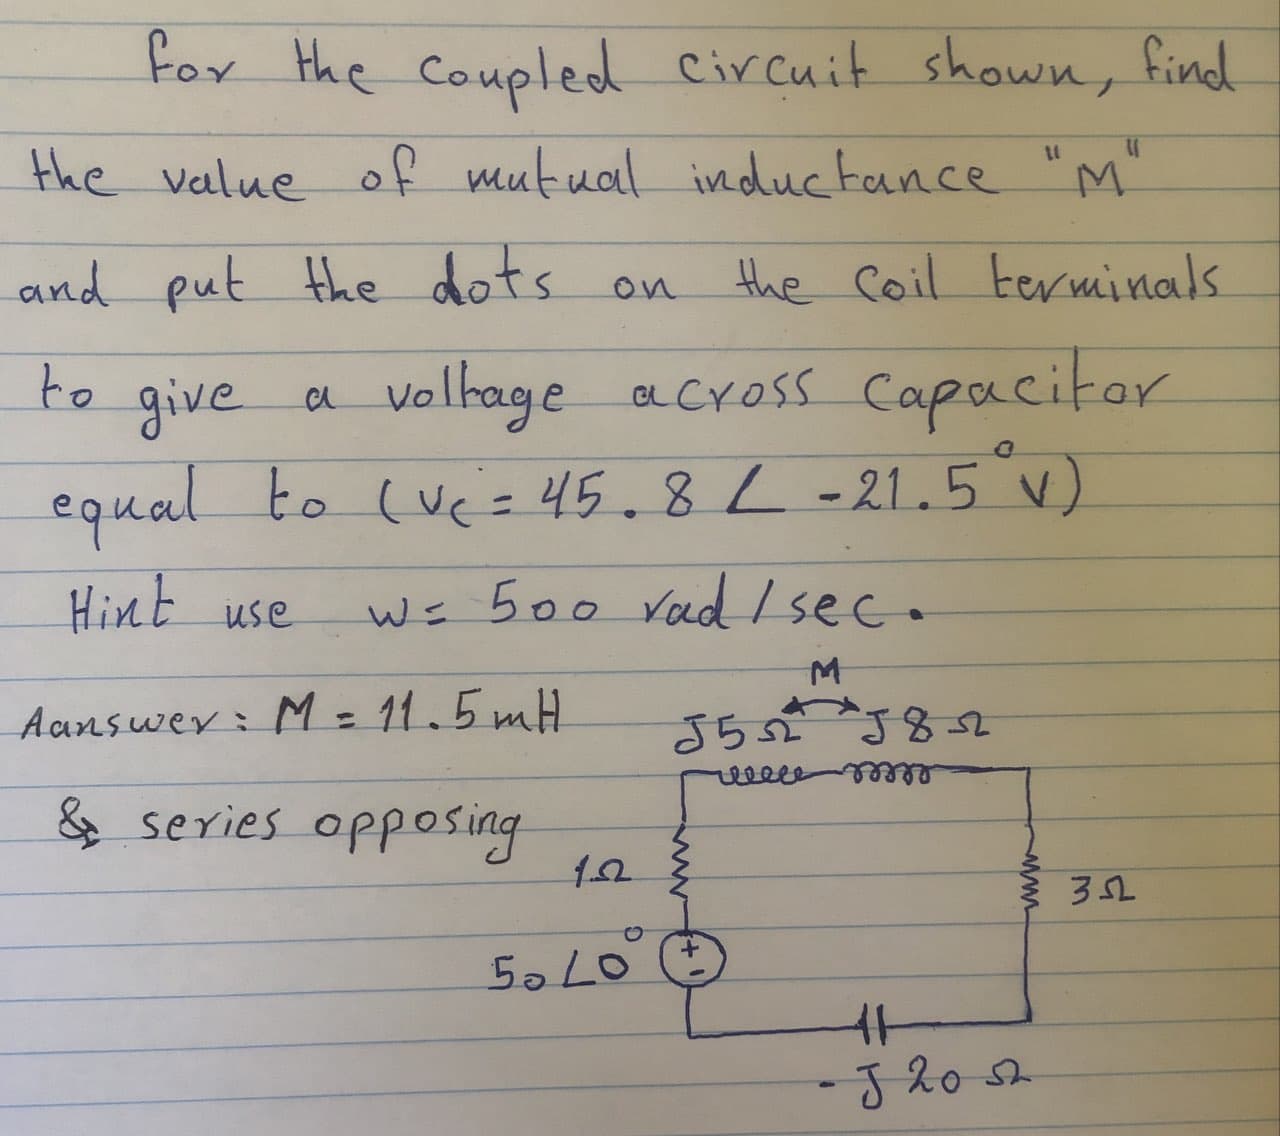 Fox the Coupled Circuit shown, find
mutual inductance "M"
the value of
and put the dots on
the Coil terminals
valtage across Capacitor
equal to (uc= 45.8L-21.5°)
to give
Hint use
Ws 500 Vad Isec.
Aanswey: M 11.5mH
さら 382
&
series opposing
5o LO
J20
www
